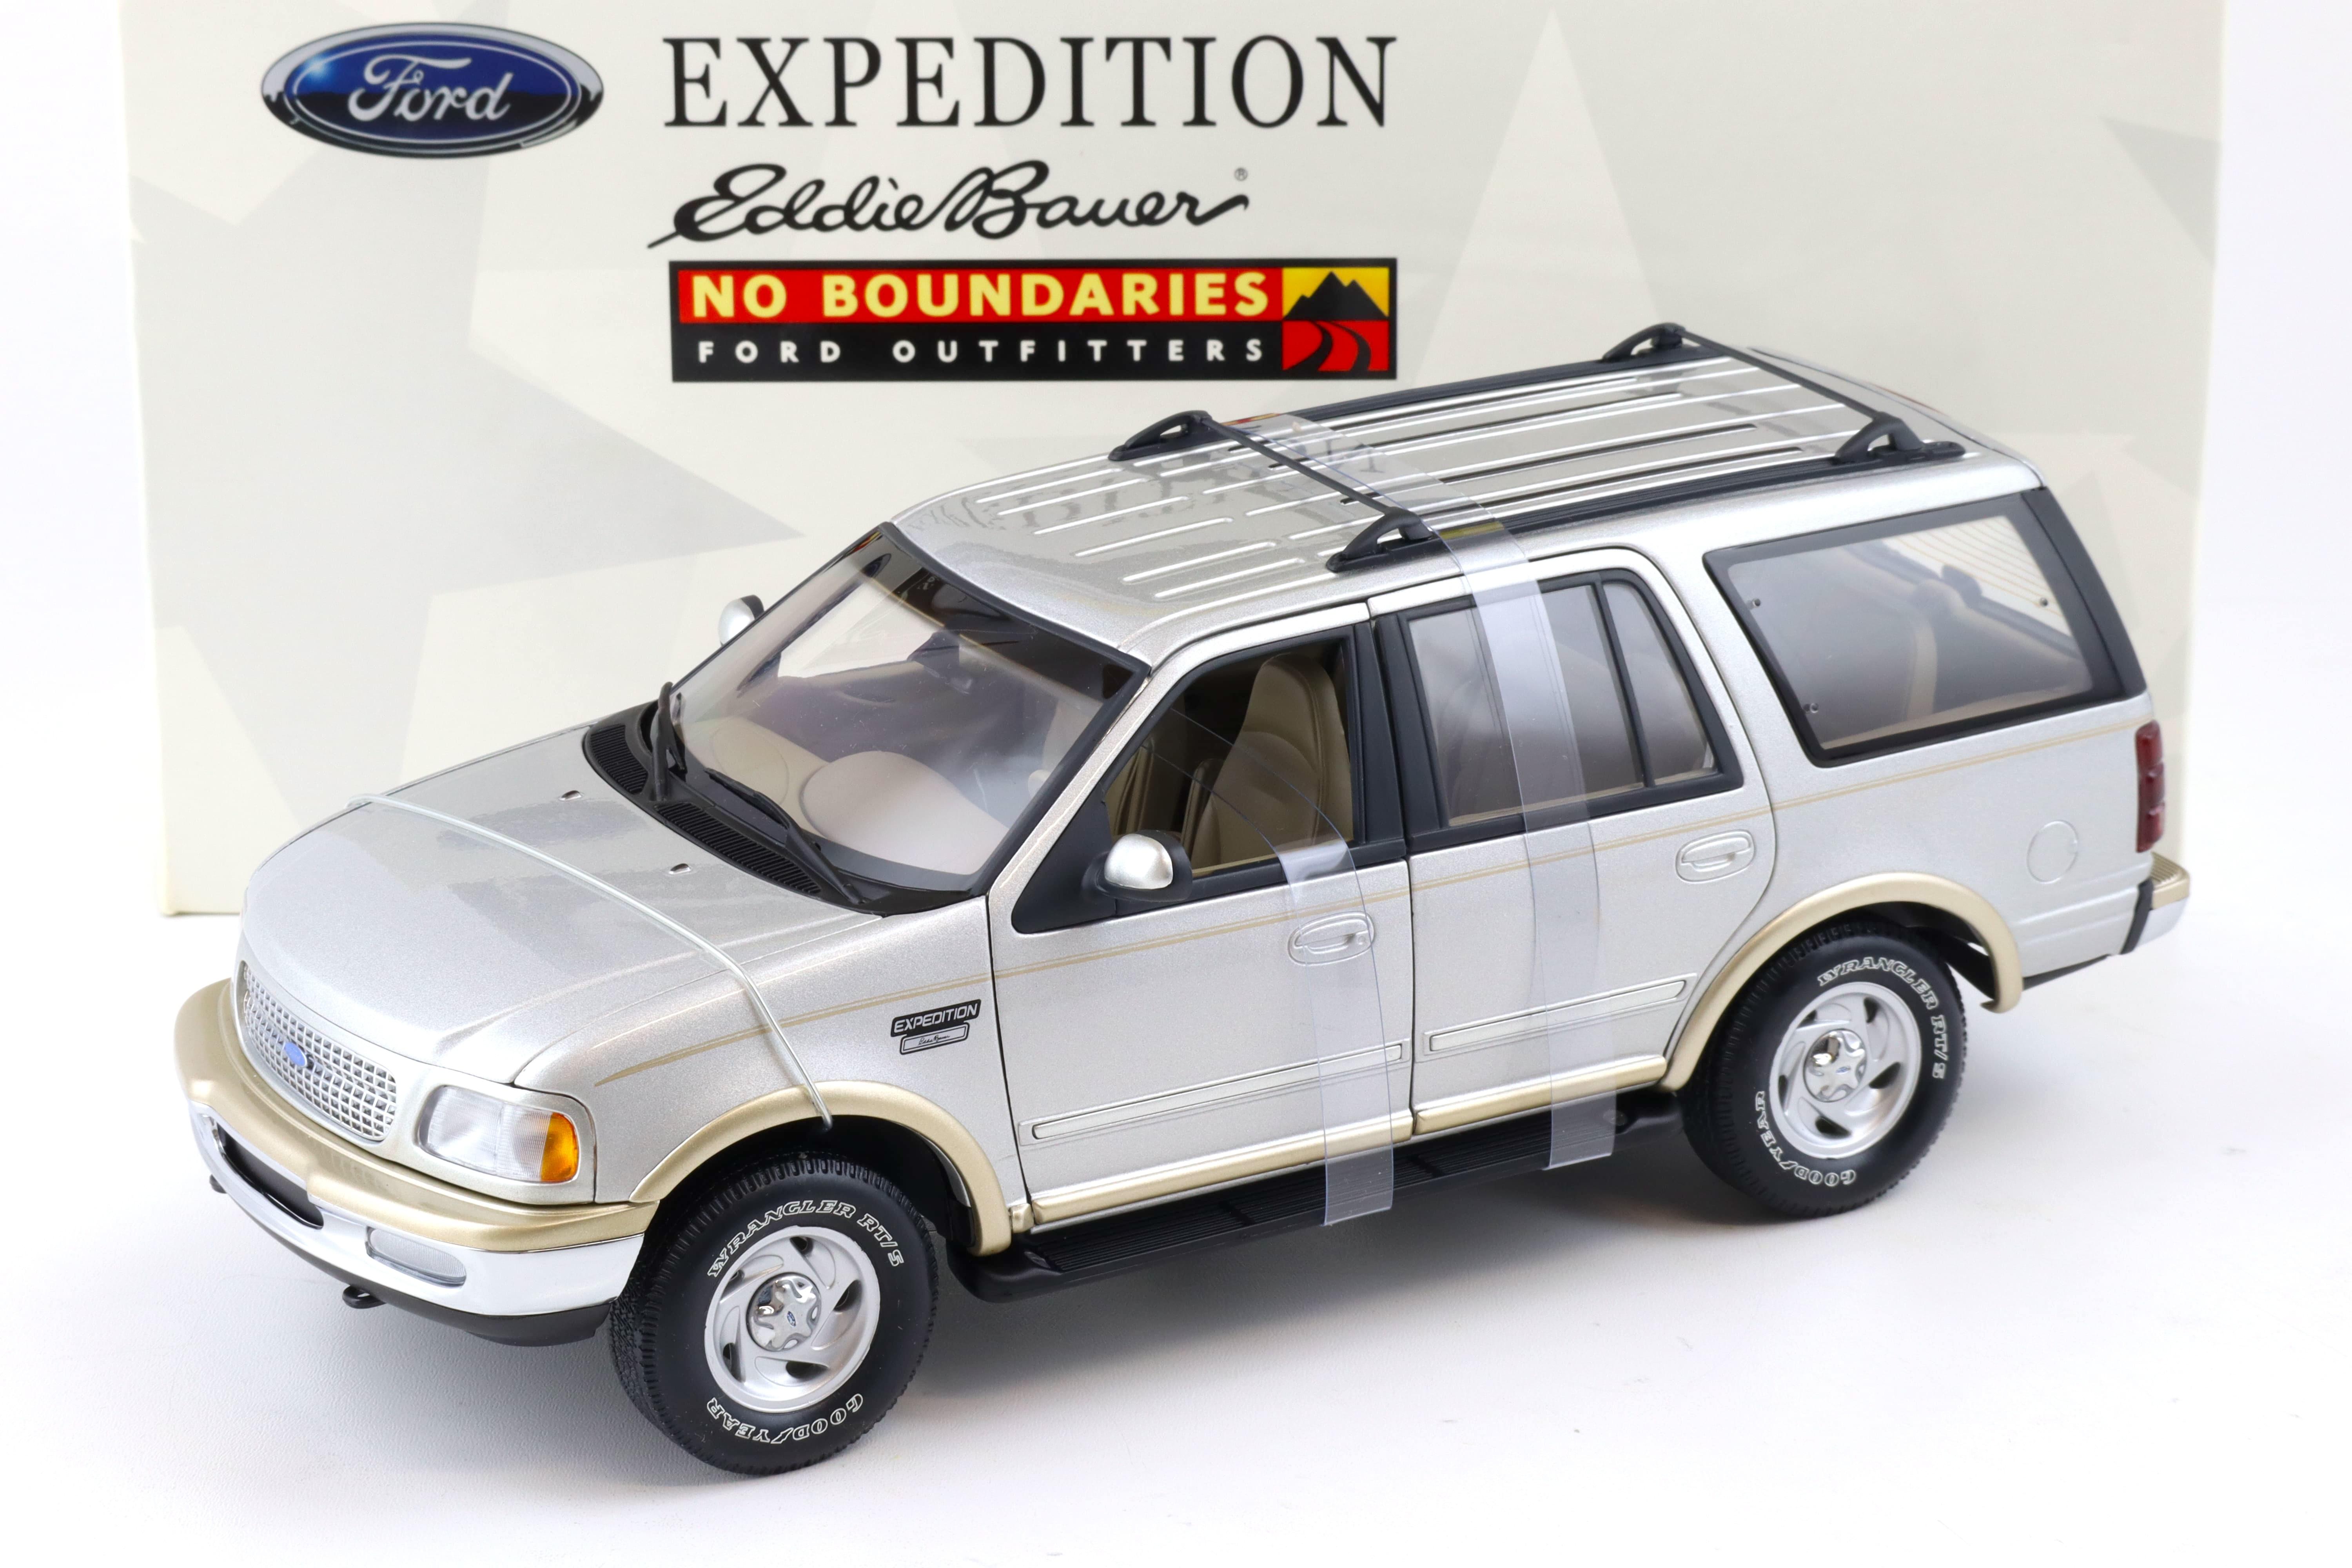 1:18 UT Models Ford Expedition Eddie Bauer No Boundaries silver 22714